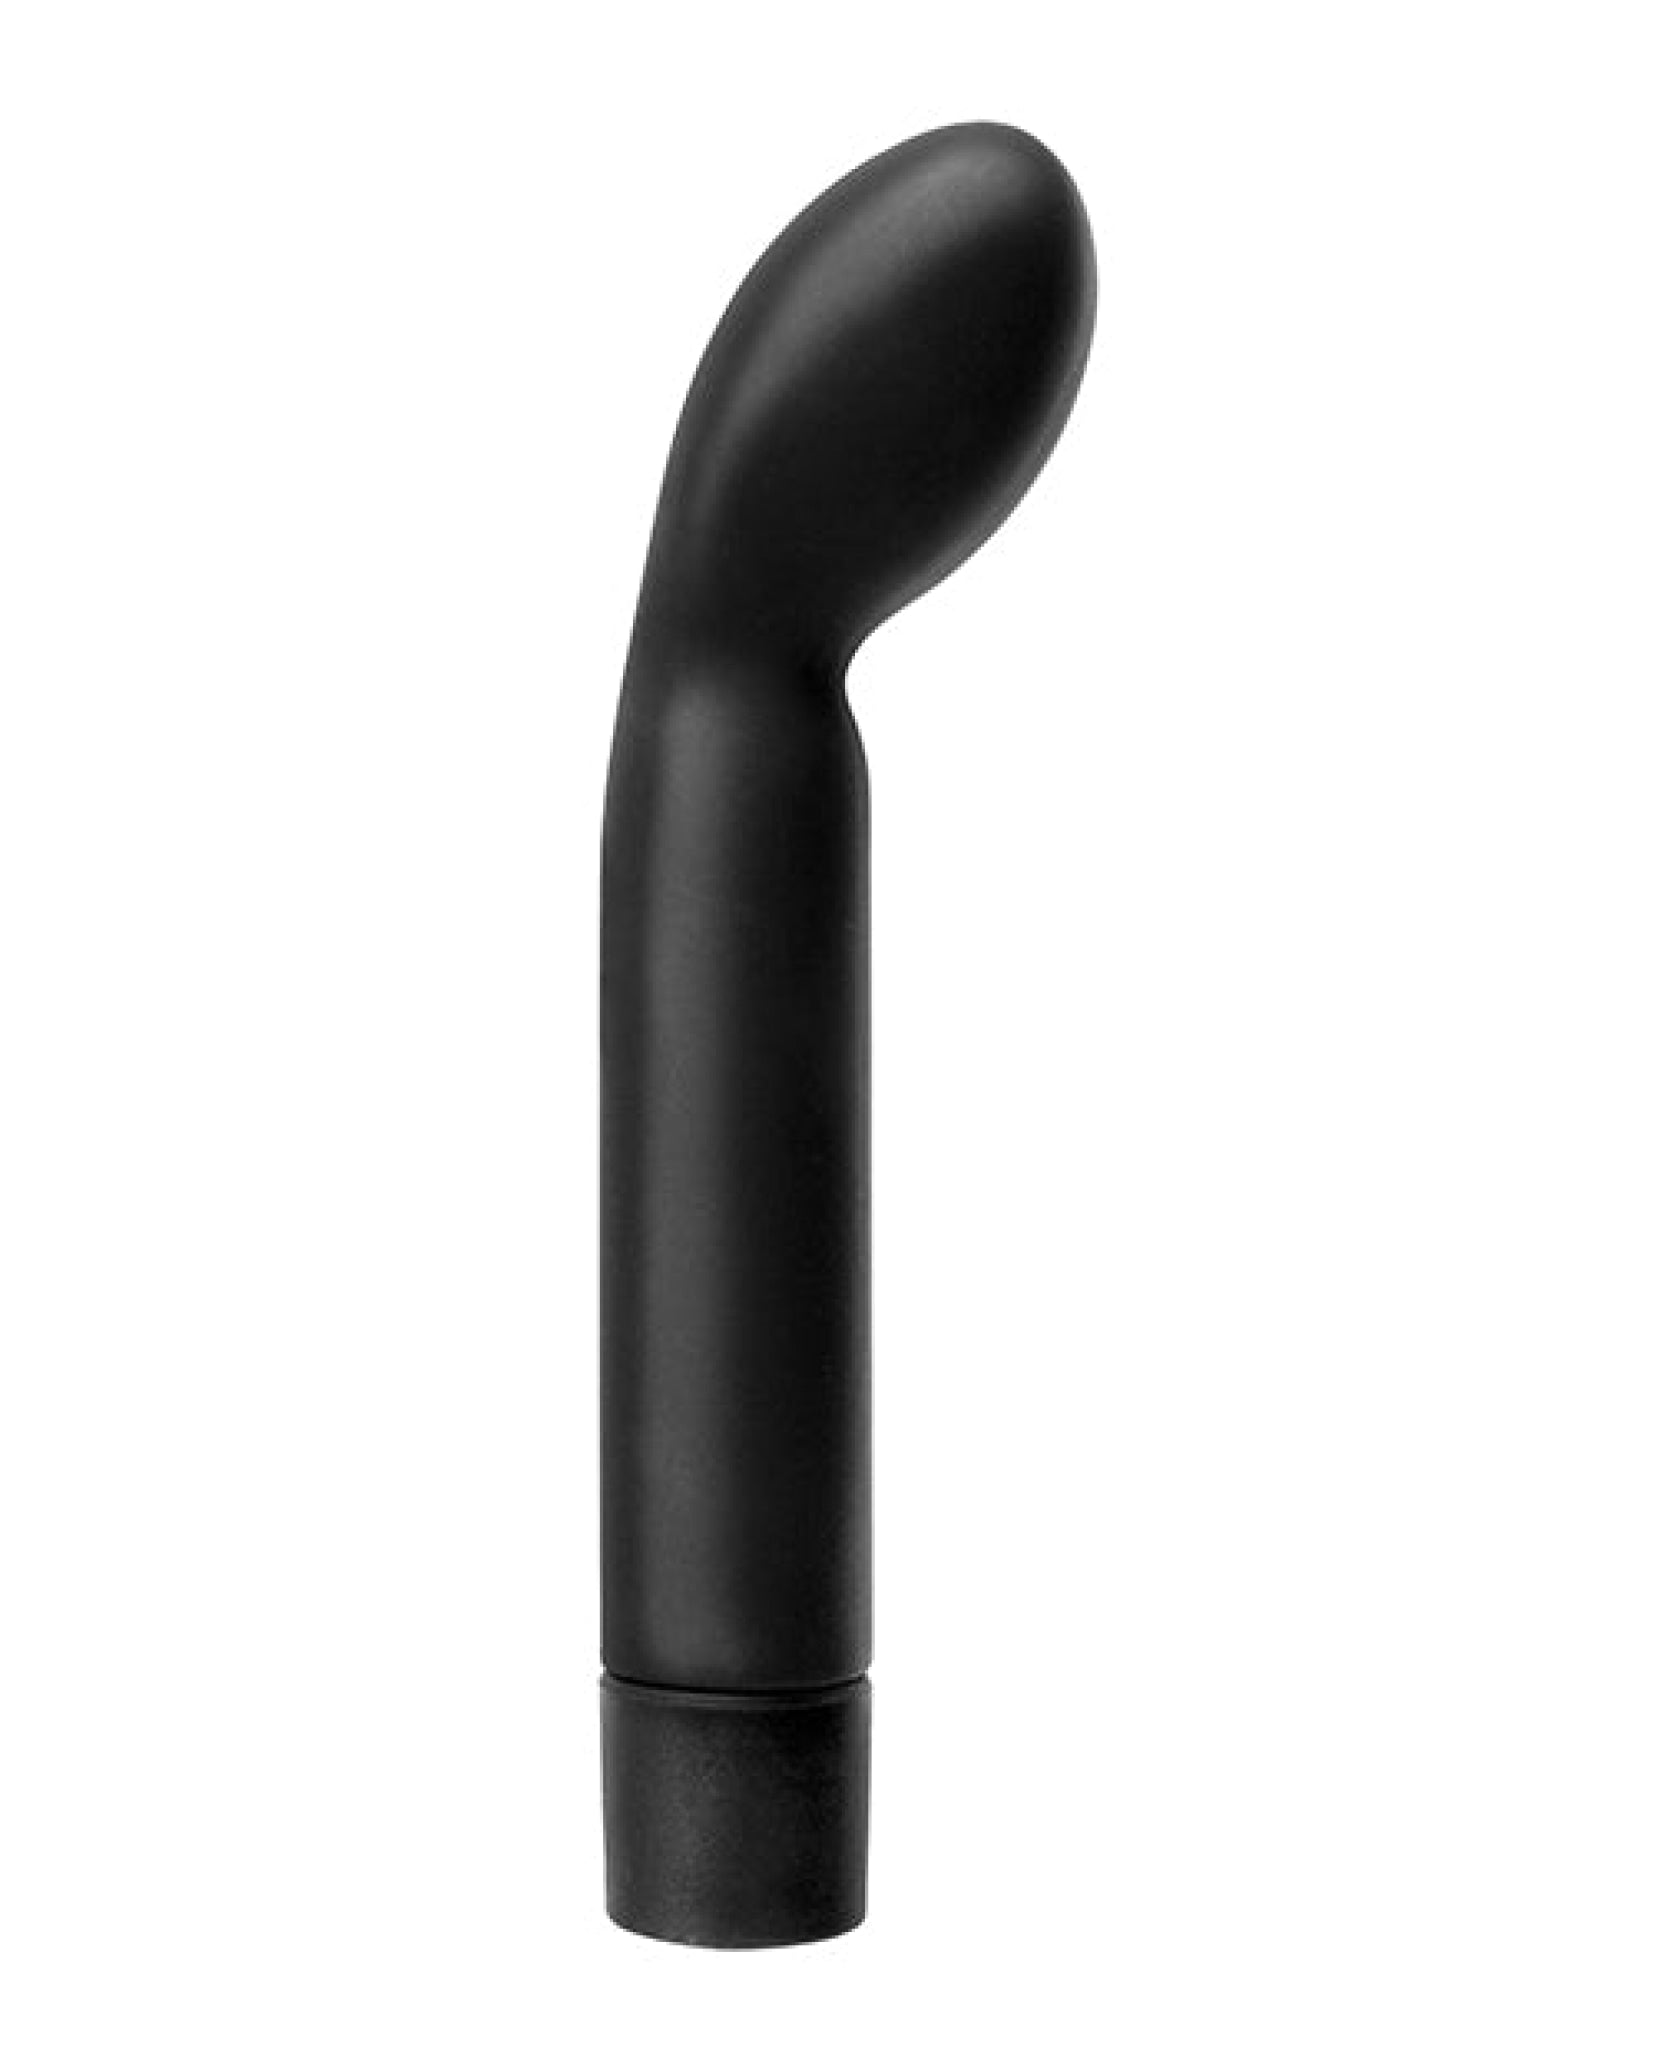 Anal Fantasy Collection P Spot Tickler Vibe - Black Pipedream®